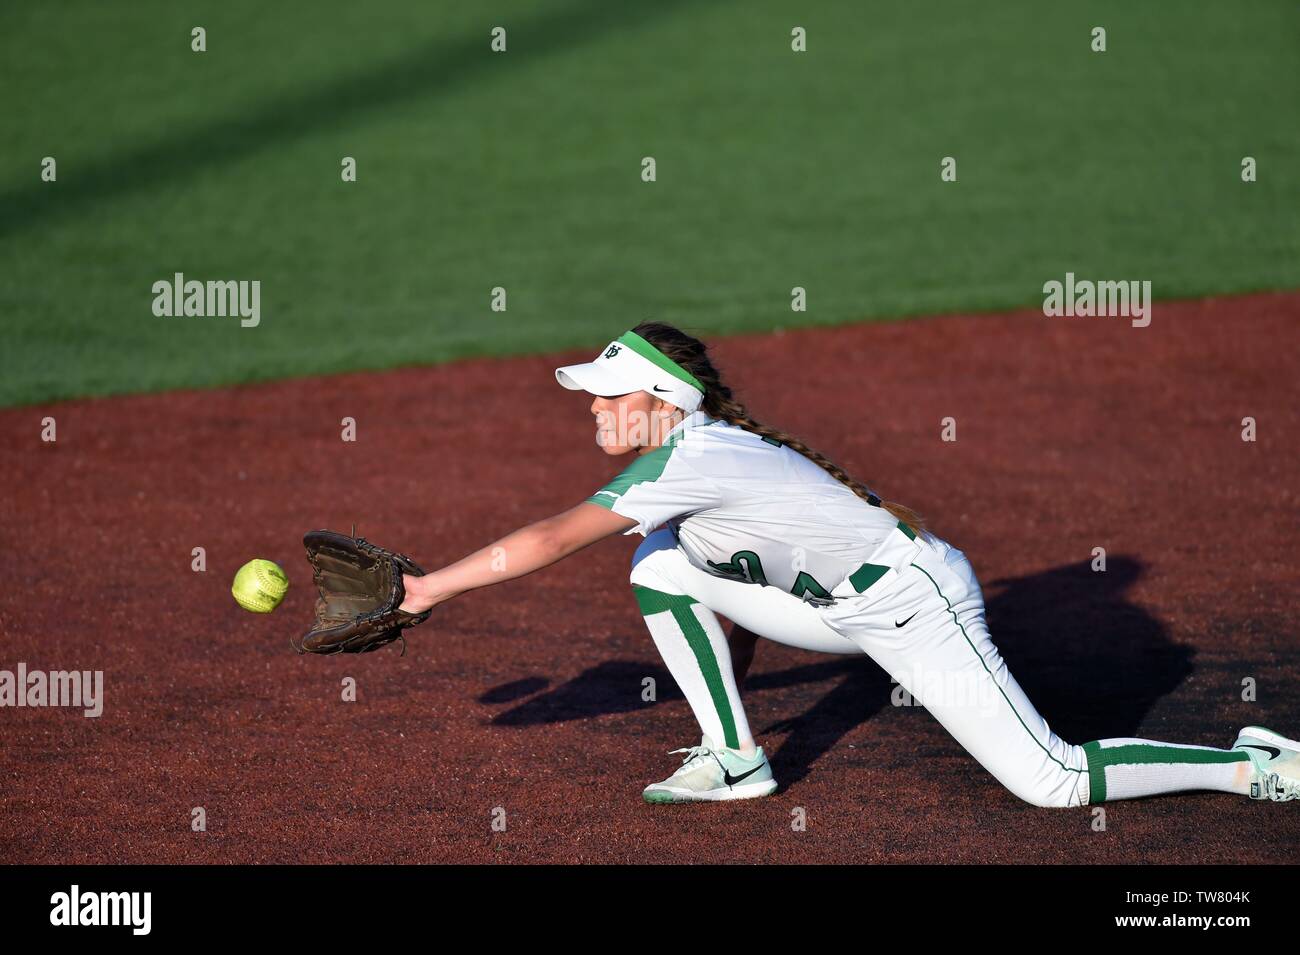 Second baseman stretching to catch a throw to record a force play at second base. USA. Stock Photo